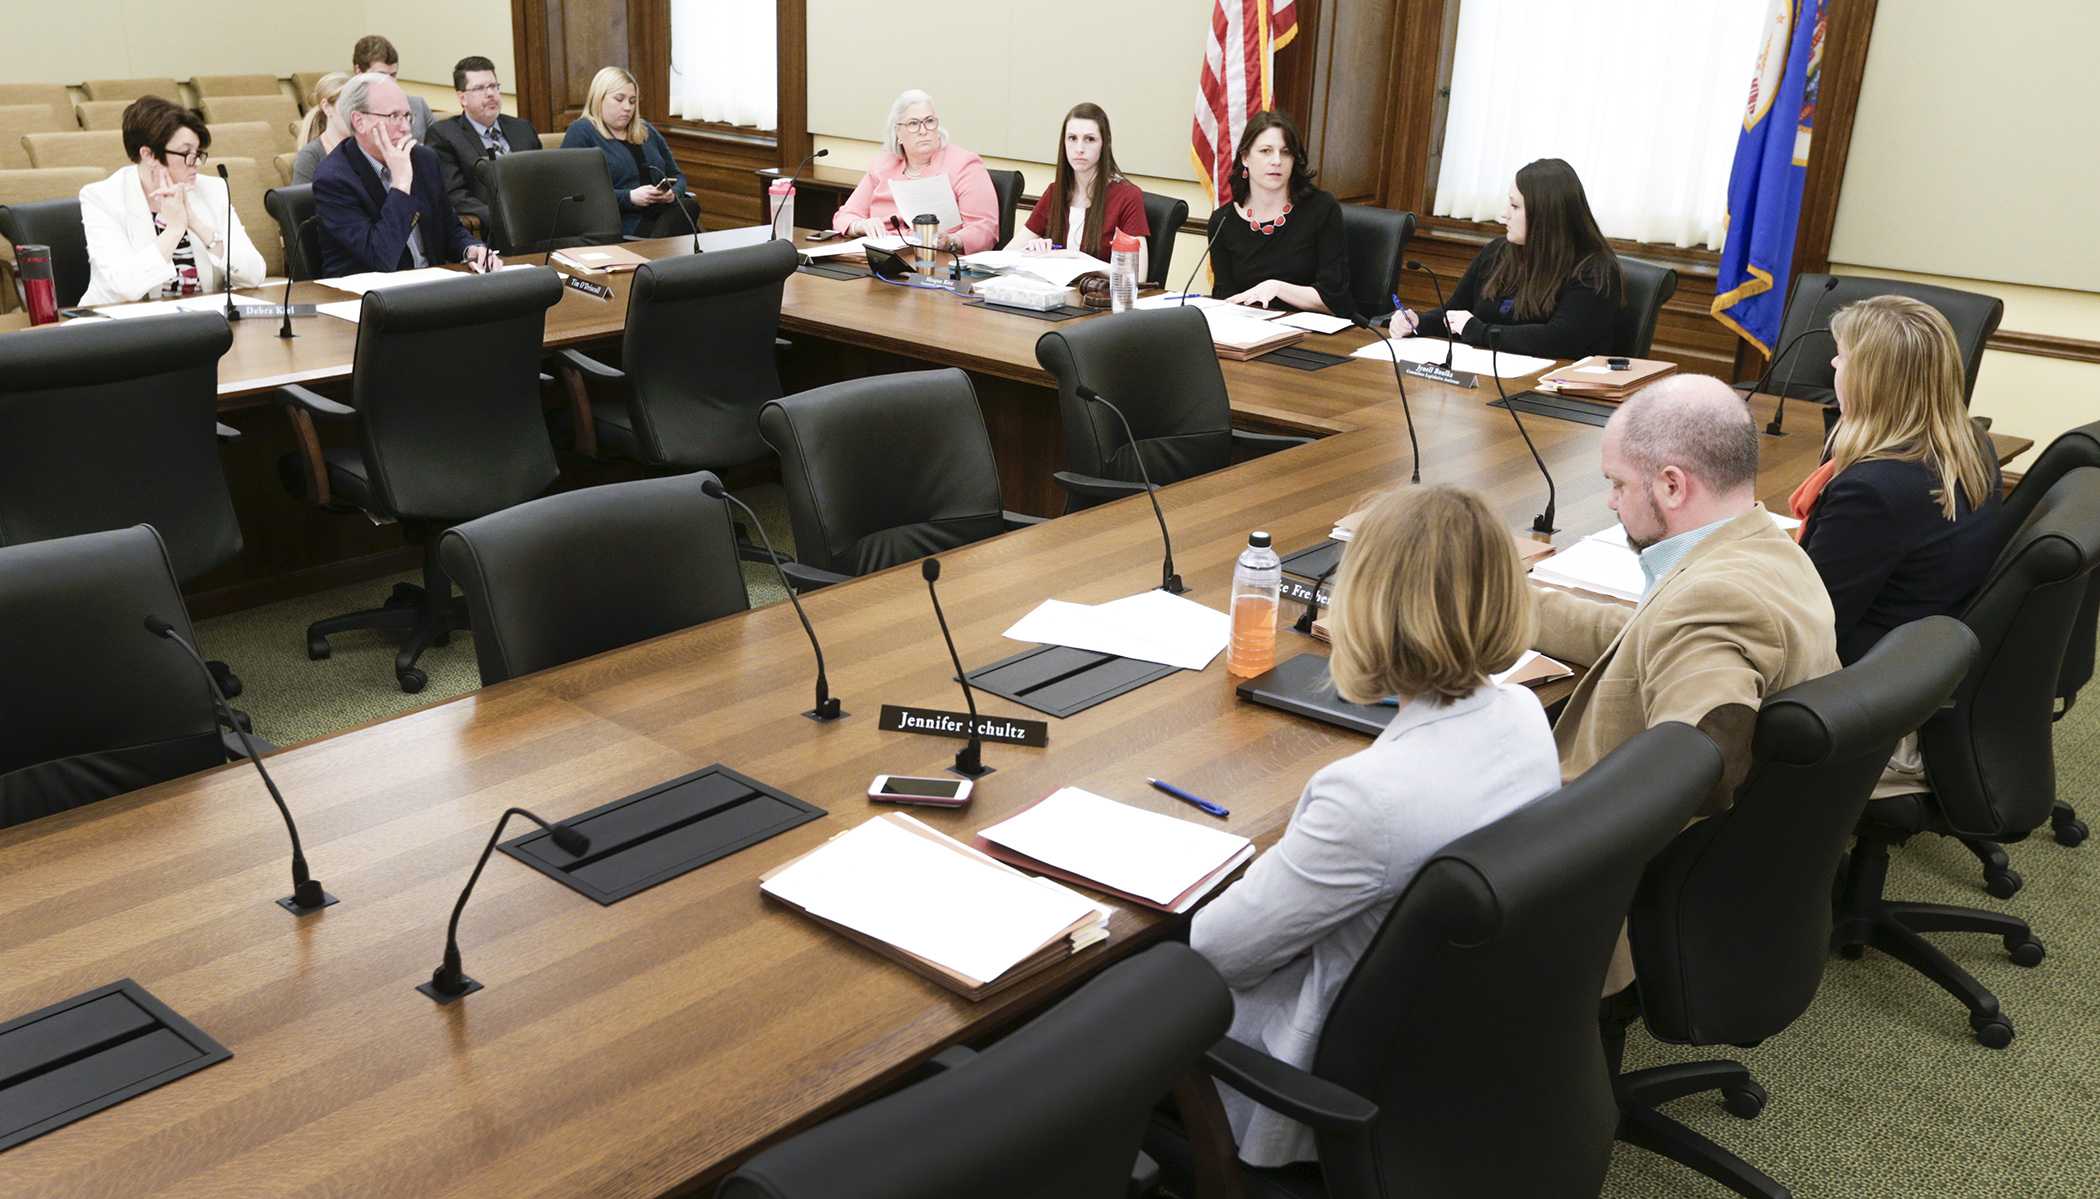 House Majority Leader Joyce Peppin, center, comments during a meeting of the Subcommittee on Workplace Safety and Respect April 23. Photo by Paul Battaglia